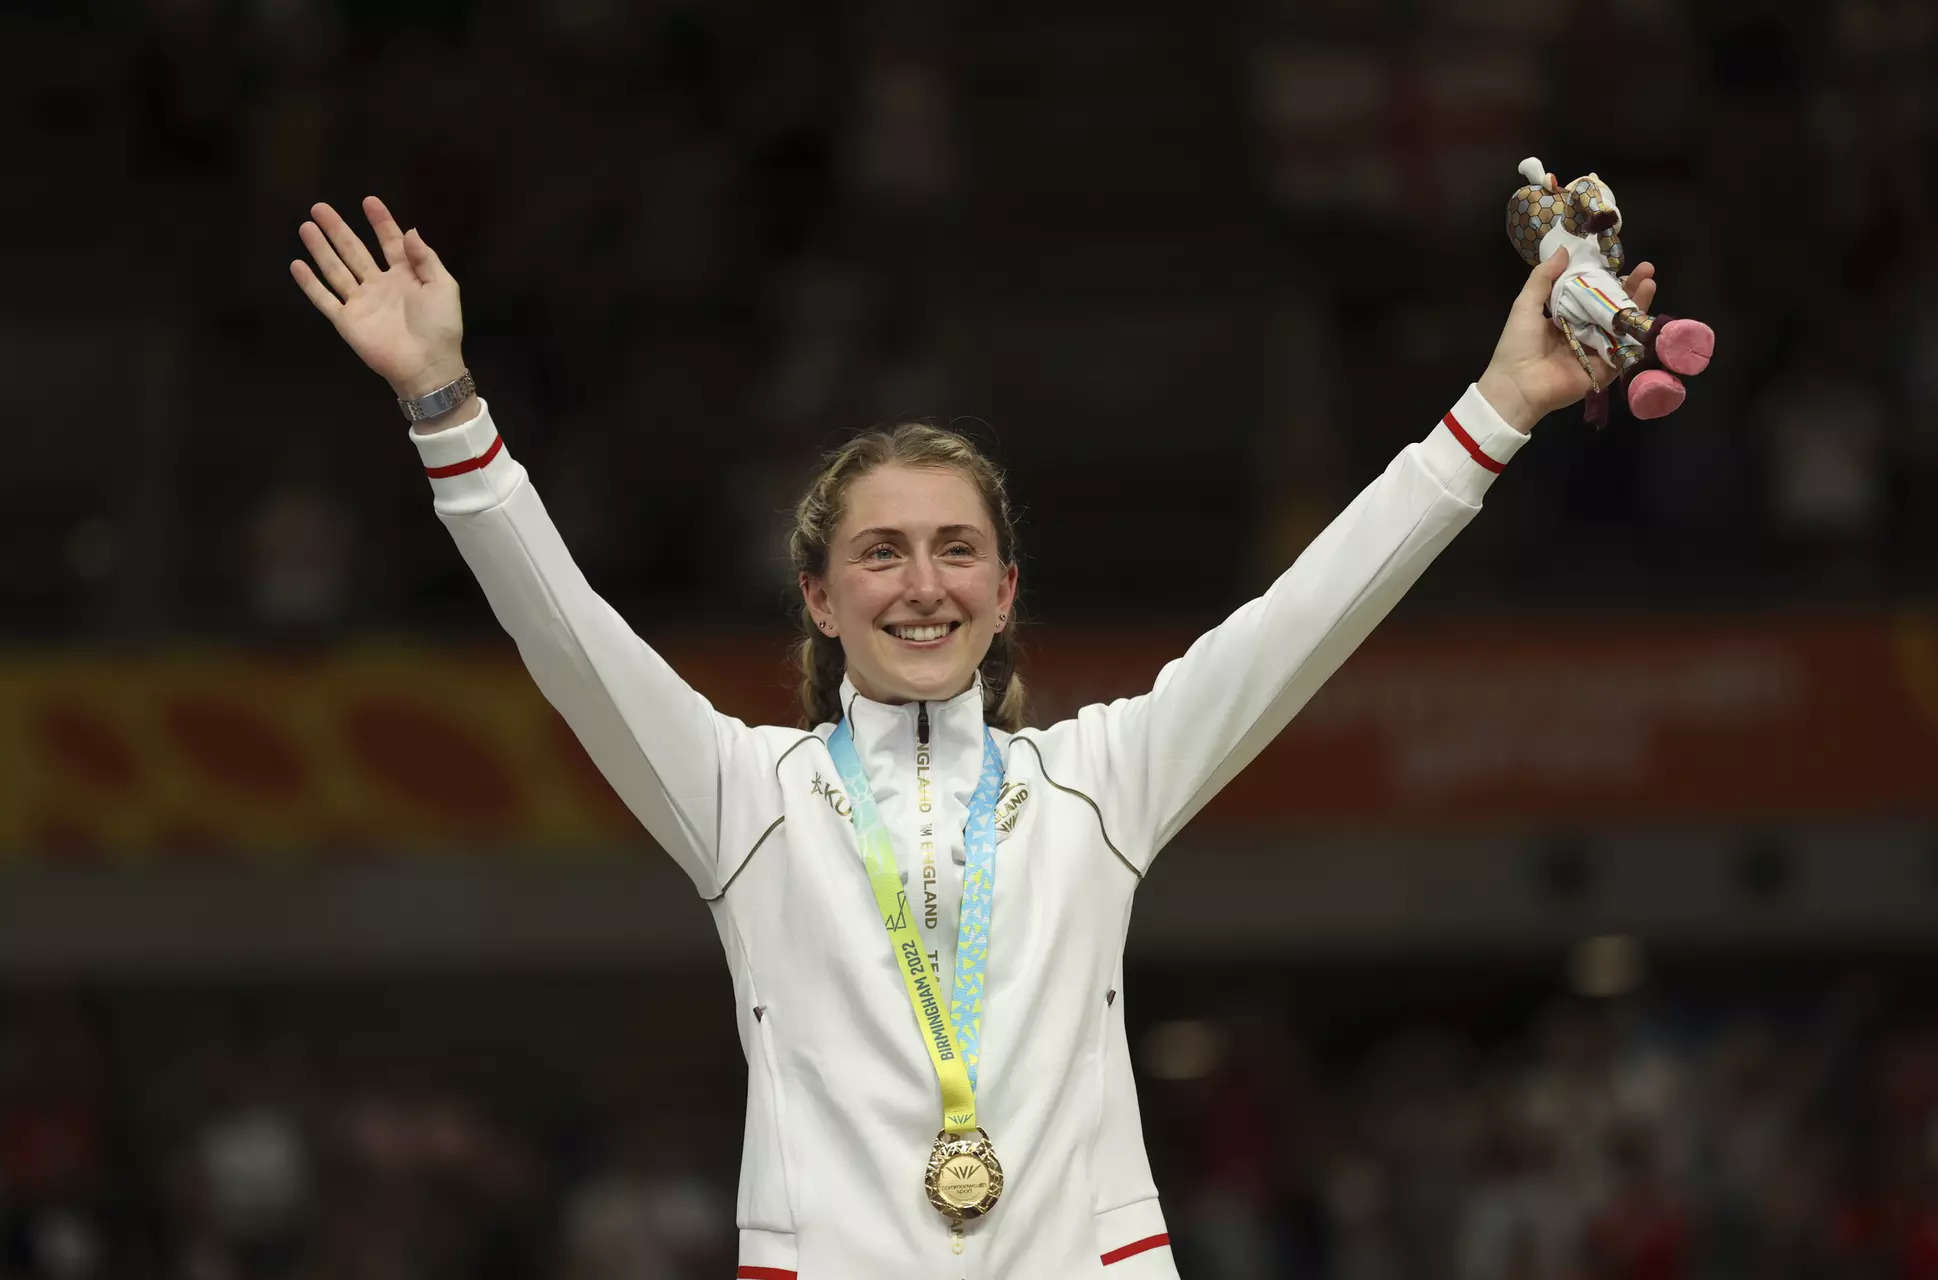 Laura Kenny retires at 31 from cycling as Britain's most successful female Olympic athlete with 5 golds 